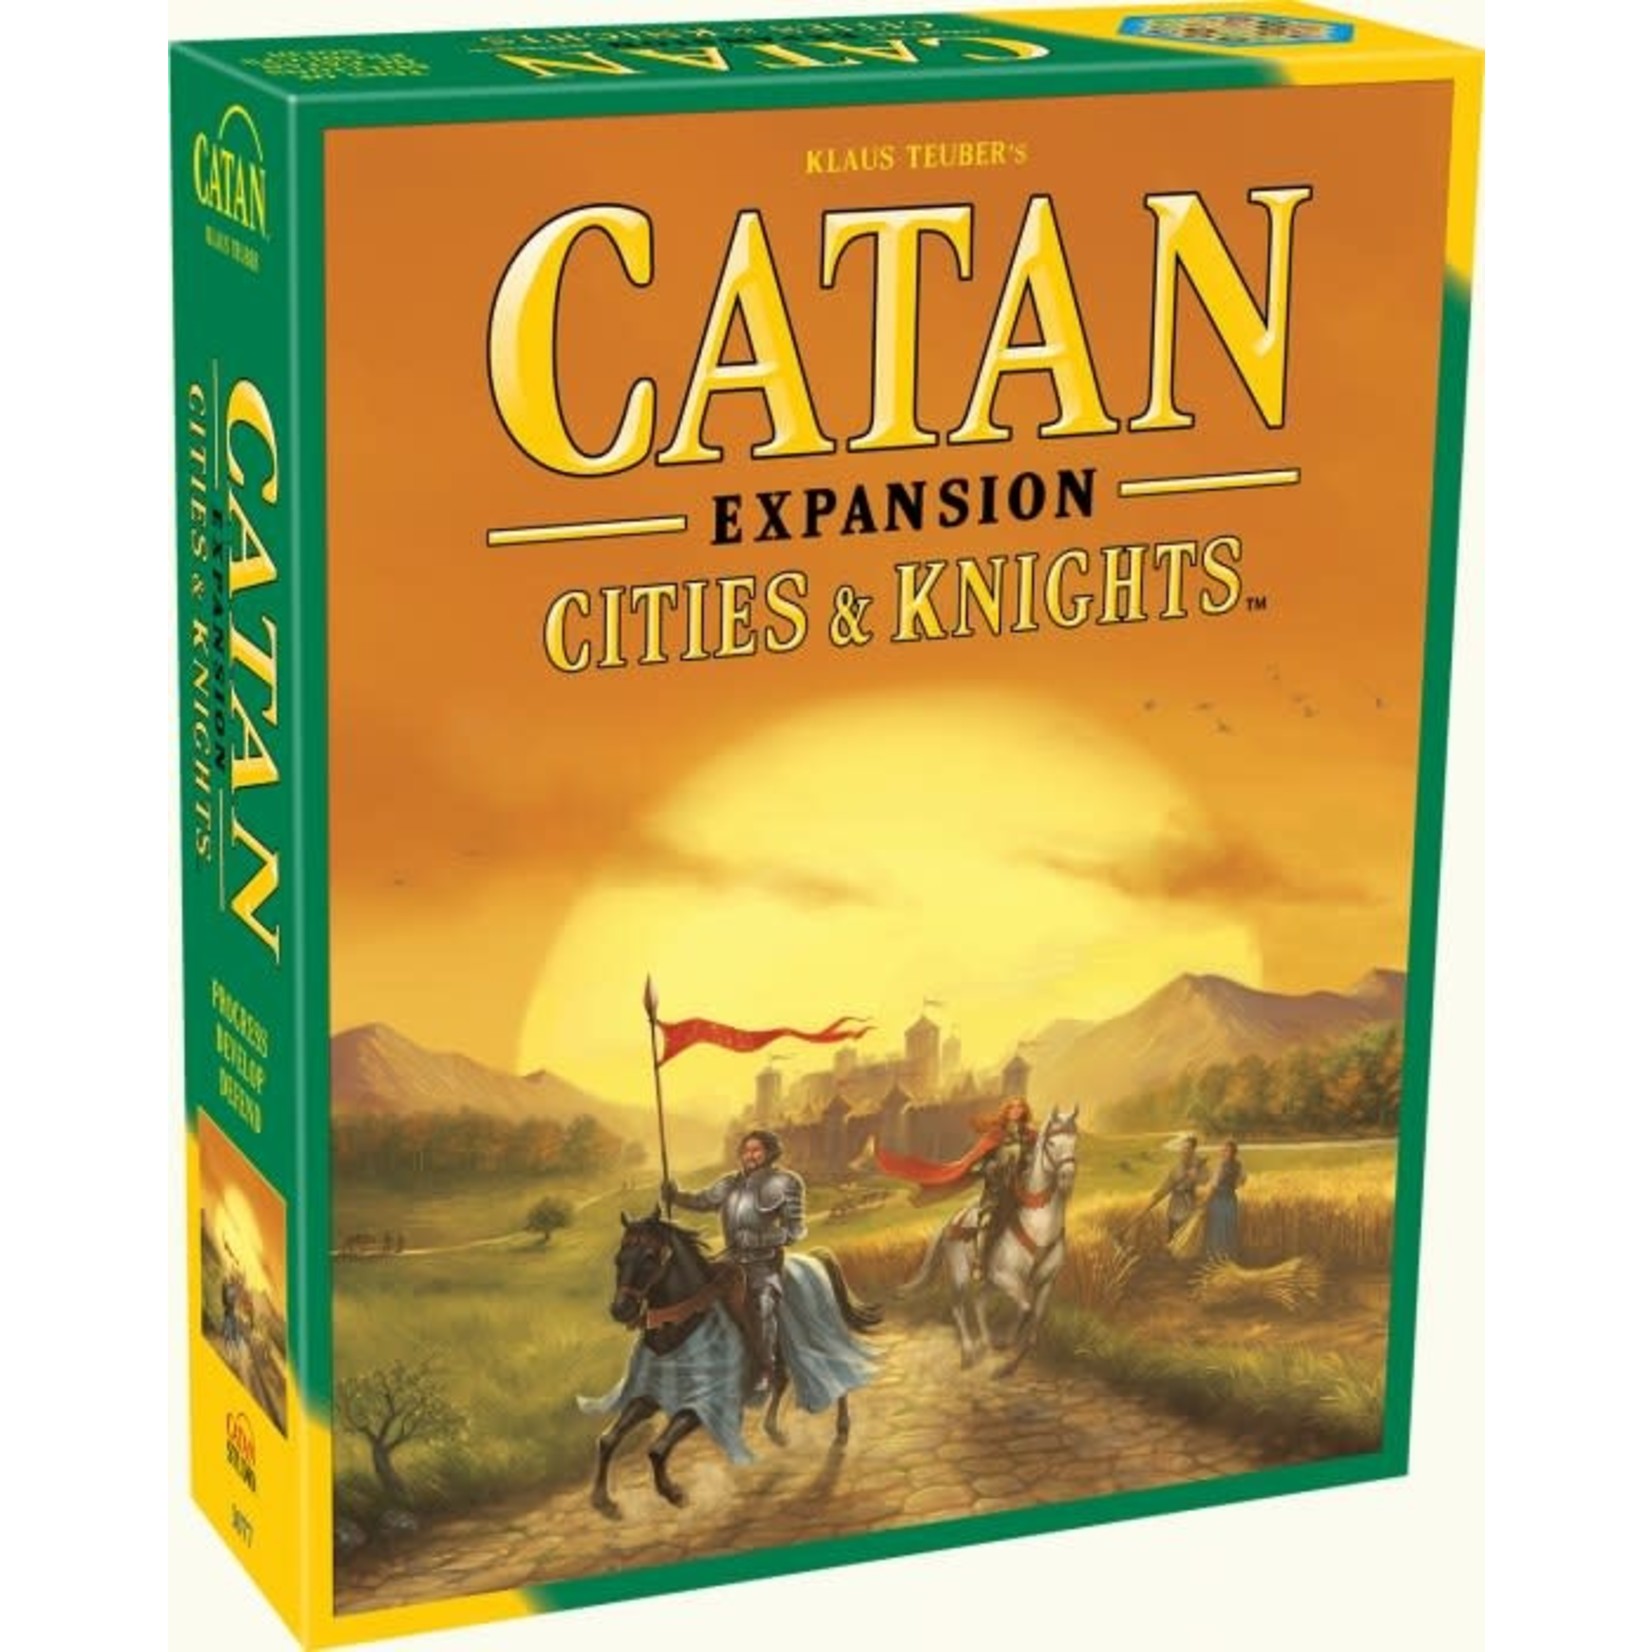 Catan Cities & Knights Expansion